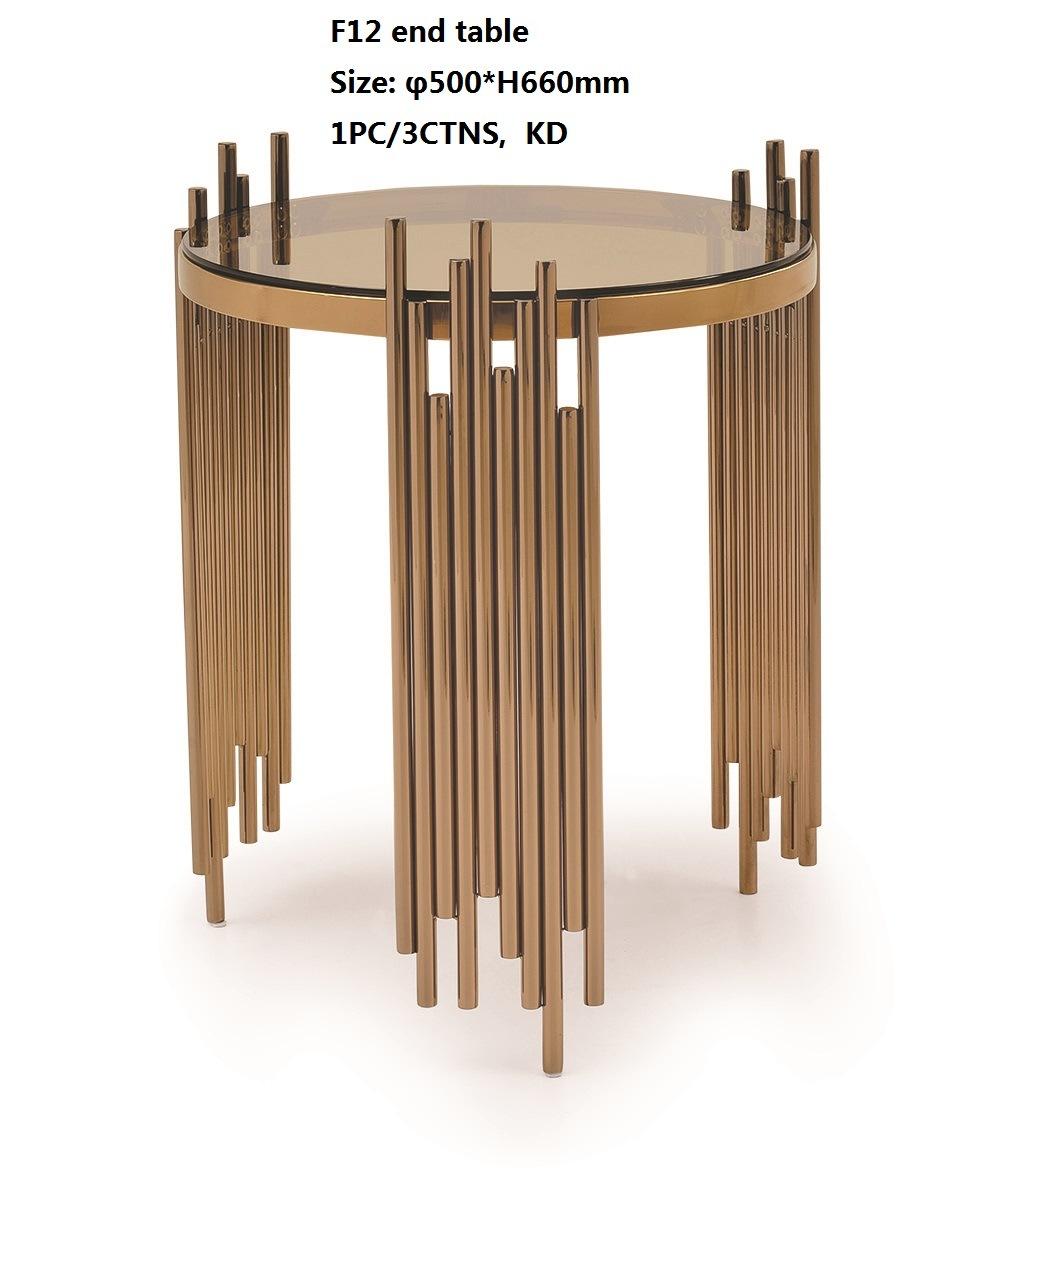 Dopro Modern Stainless Steel Polished Titanium Gold Console Table X12 Series, with Black Tempered Glass Table Top